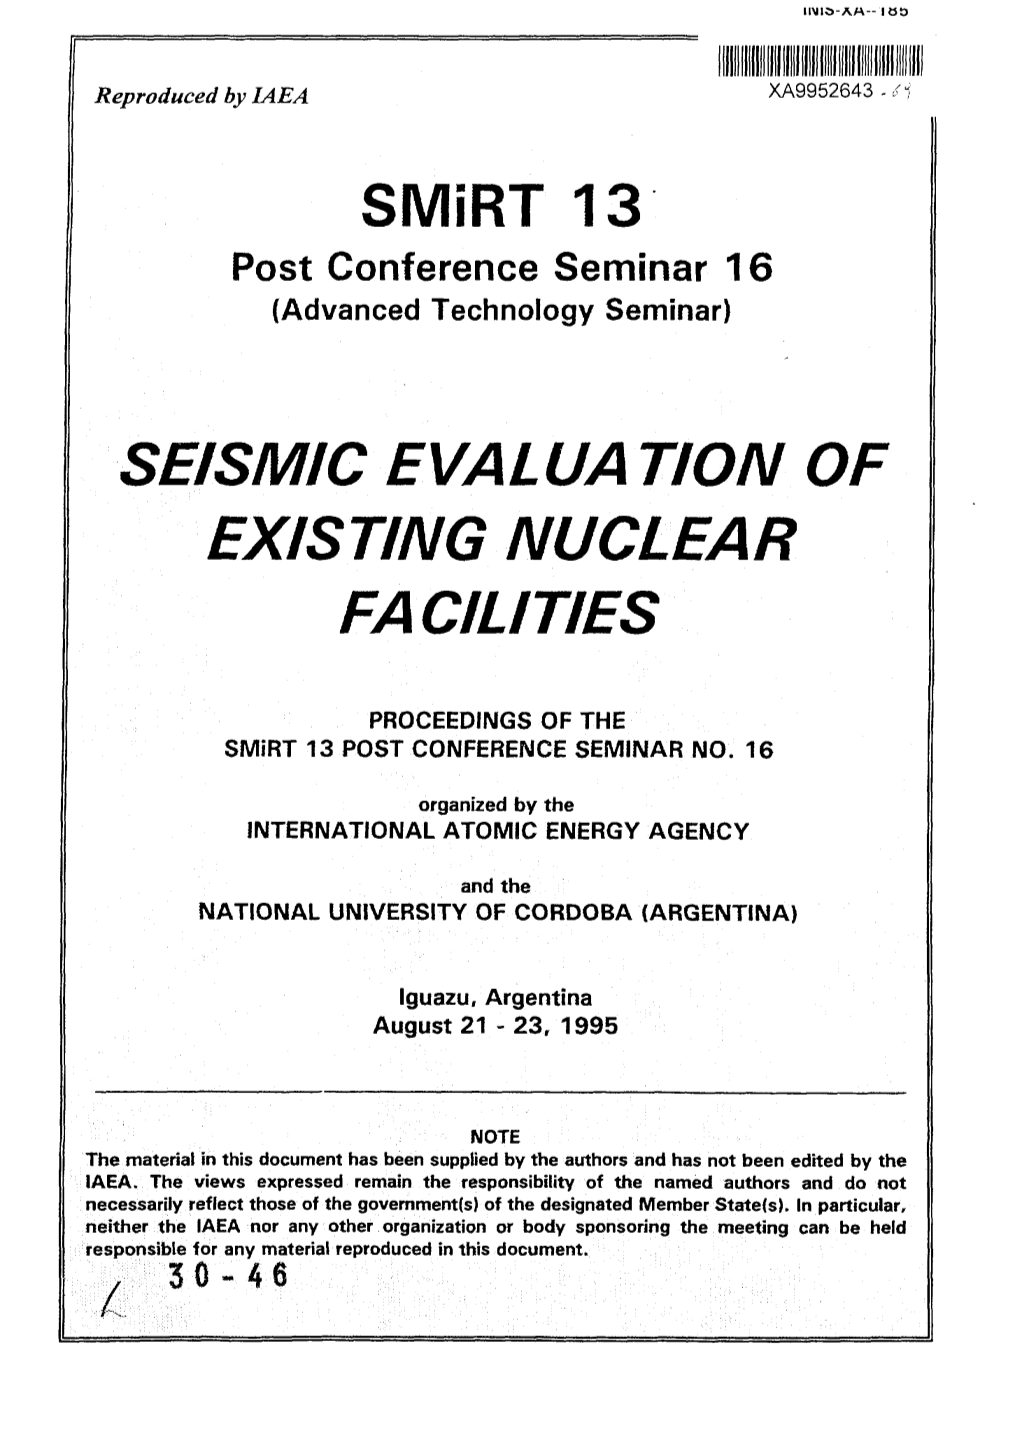 Smirt 13 SEISMIC EVALUA TION of EXISTING NUCLEAR FACILITIES